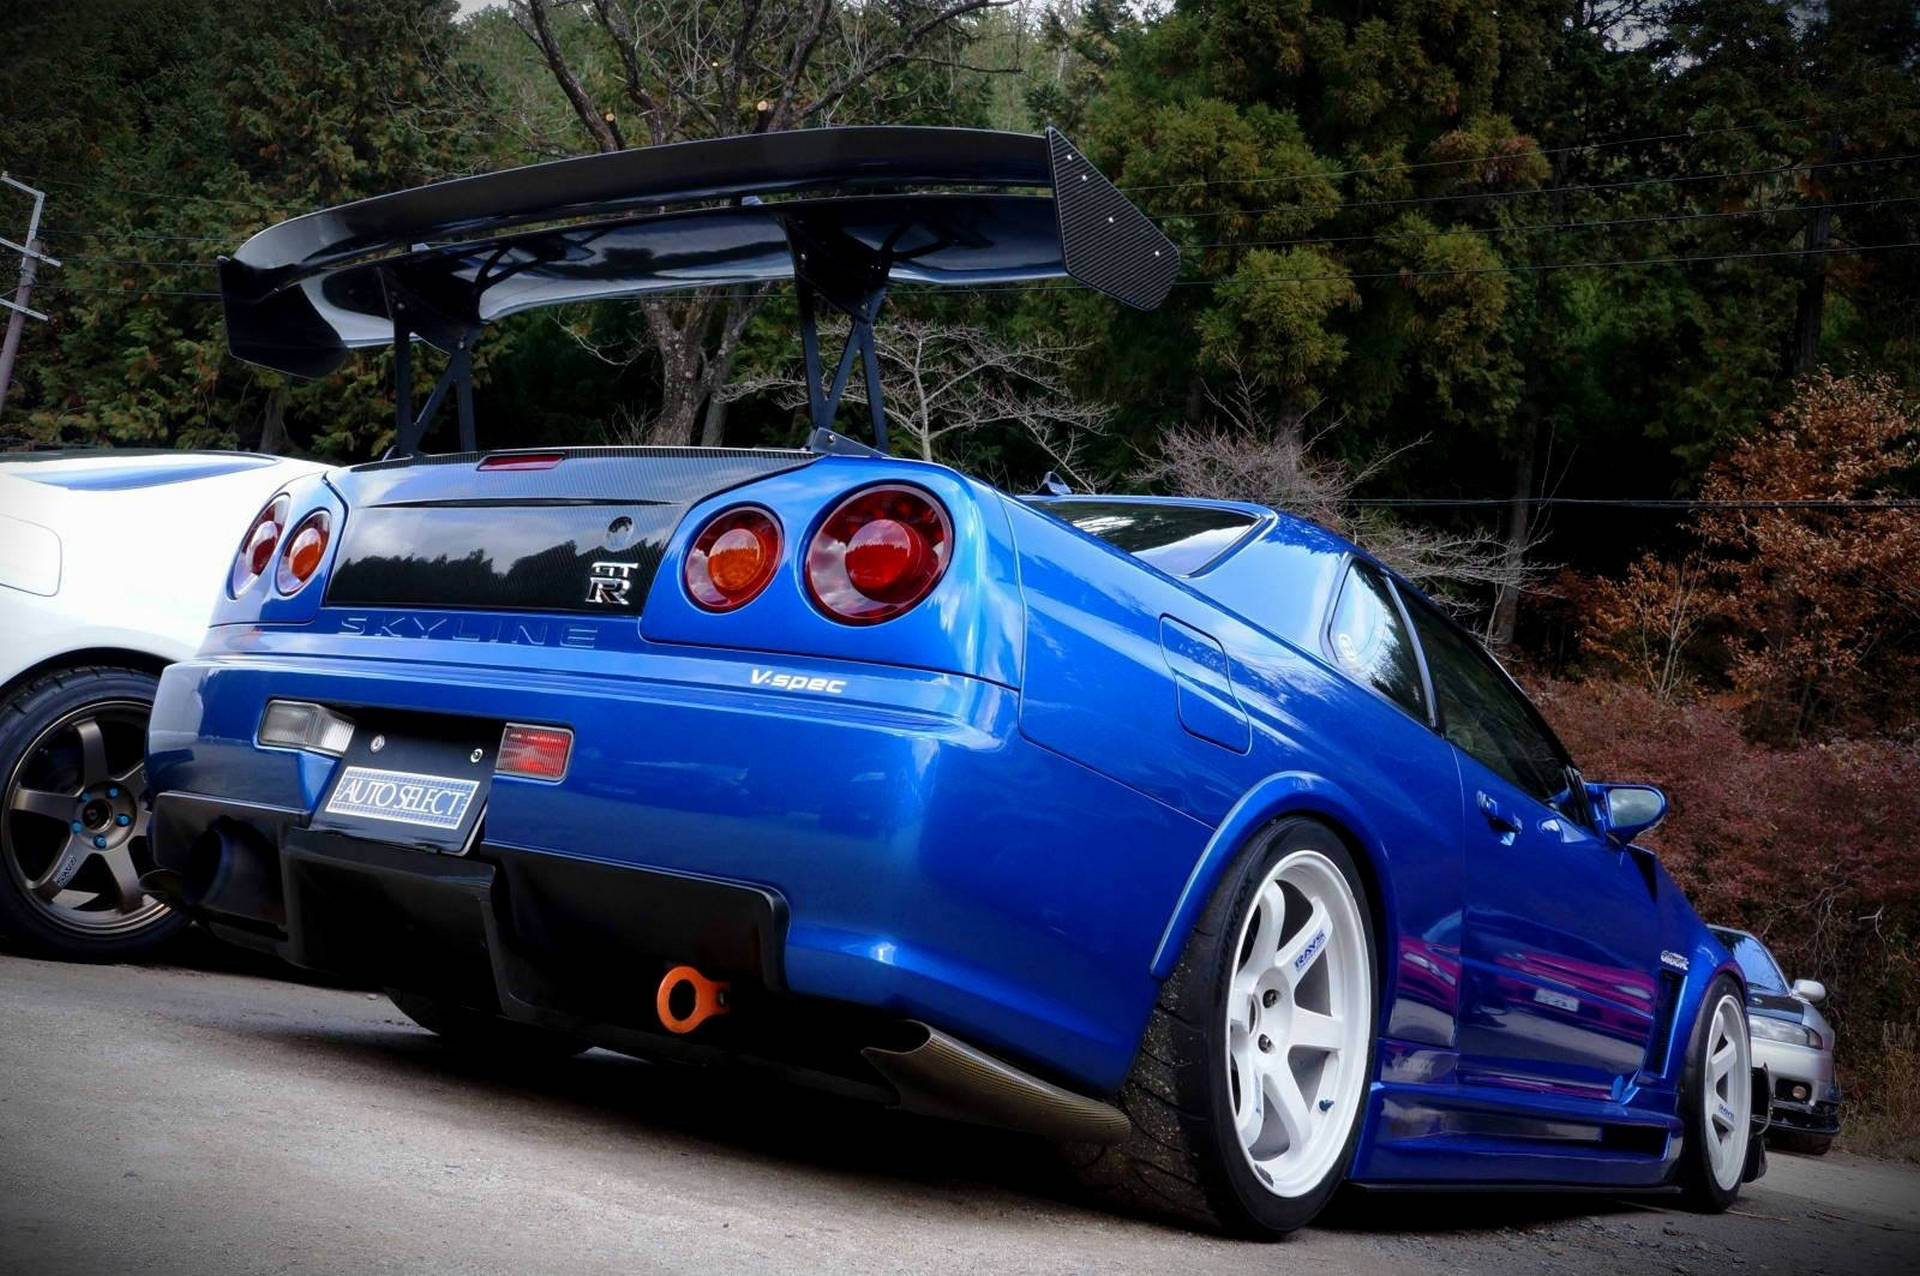 Majestic Shot Of A Nissan Skyline Gtr R34 In High-definition.